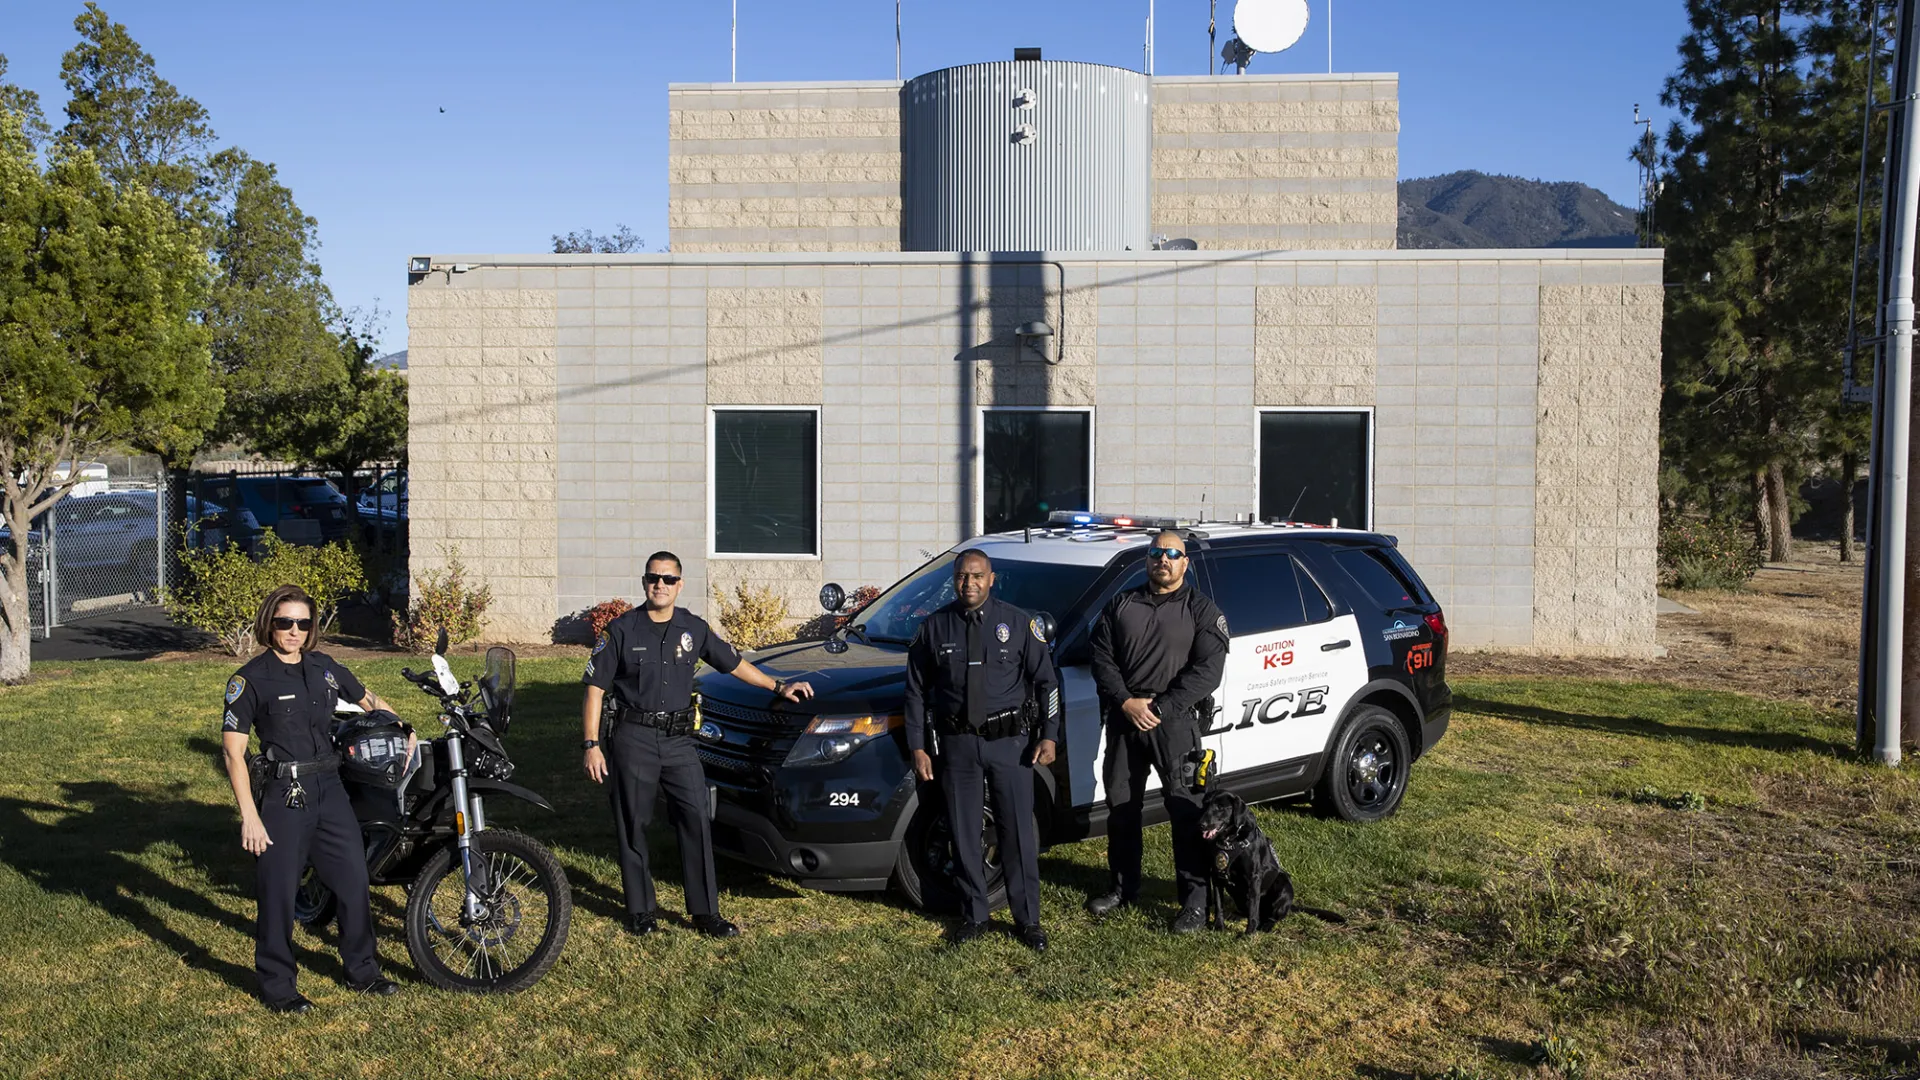 From left, Sgt. Devon Herrington, Sgt. Jose Plasencia, Chief John Guttierez, K9 Officer Manuel Aguirre and Police K9 Vader. The CSUSB University Police Department celebrates 50 years of service in 2024.